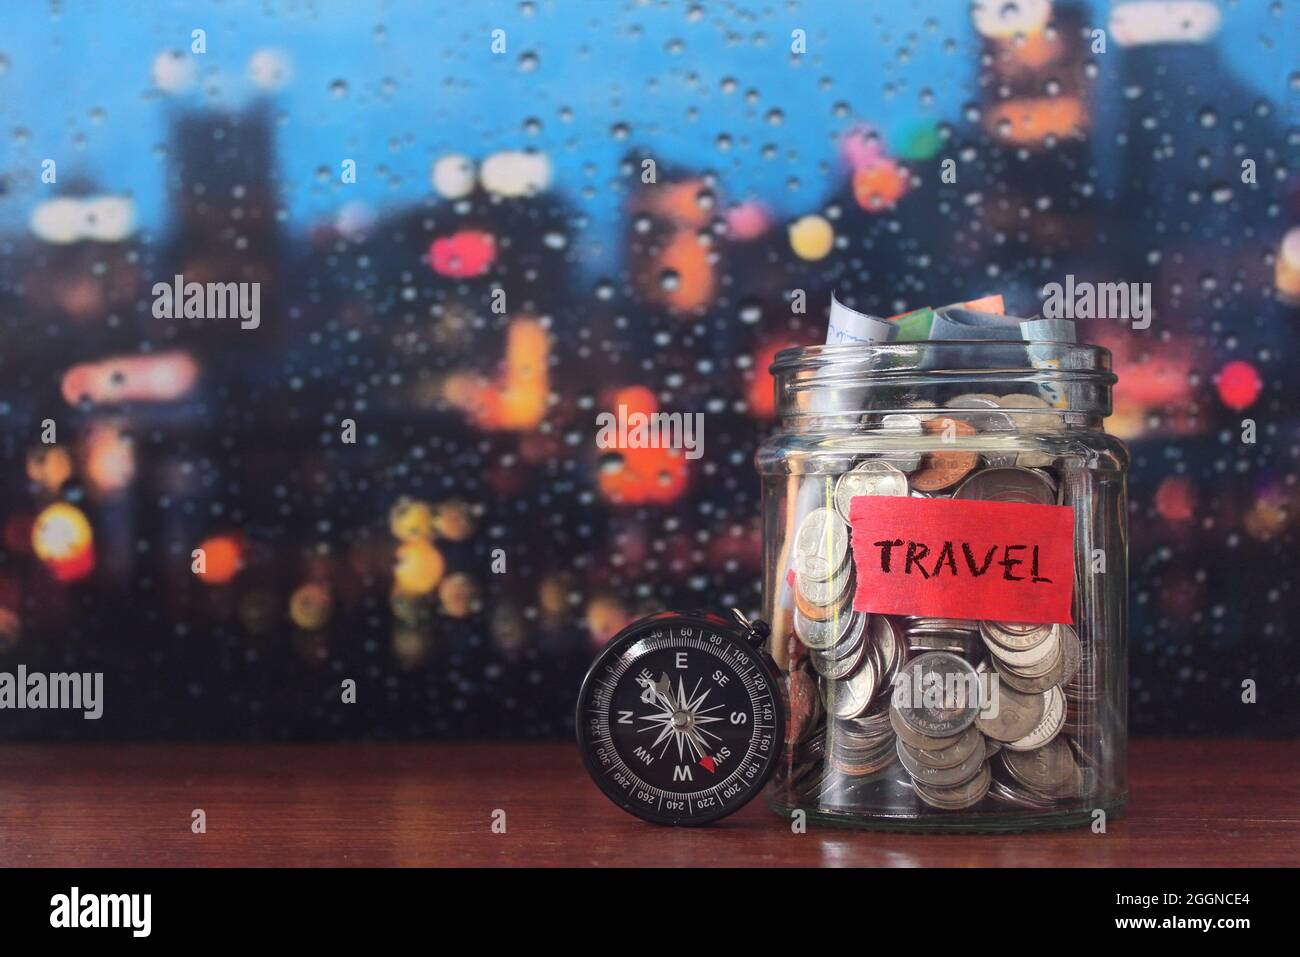 Travel budget concept. Travel money savings in a glass jar with compass. Copy space for text Stock Photo